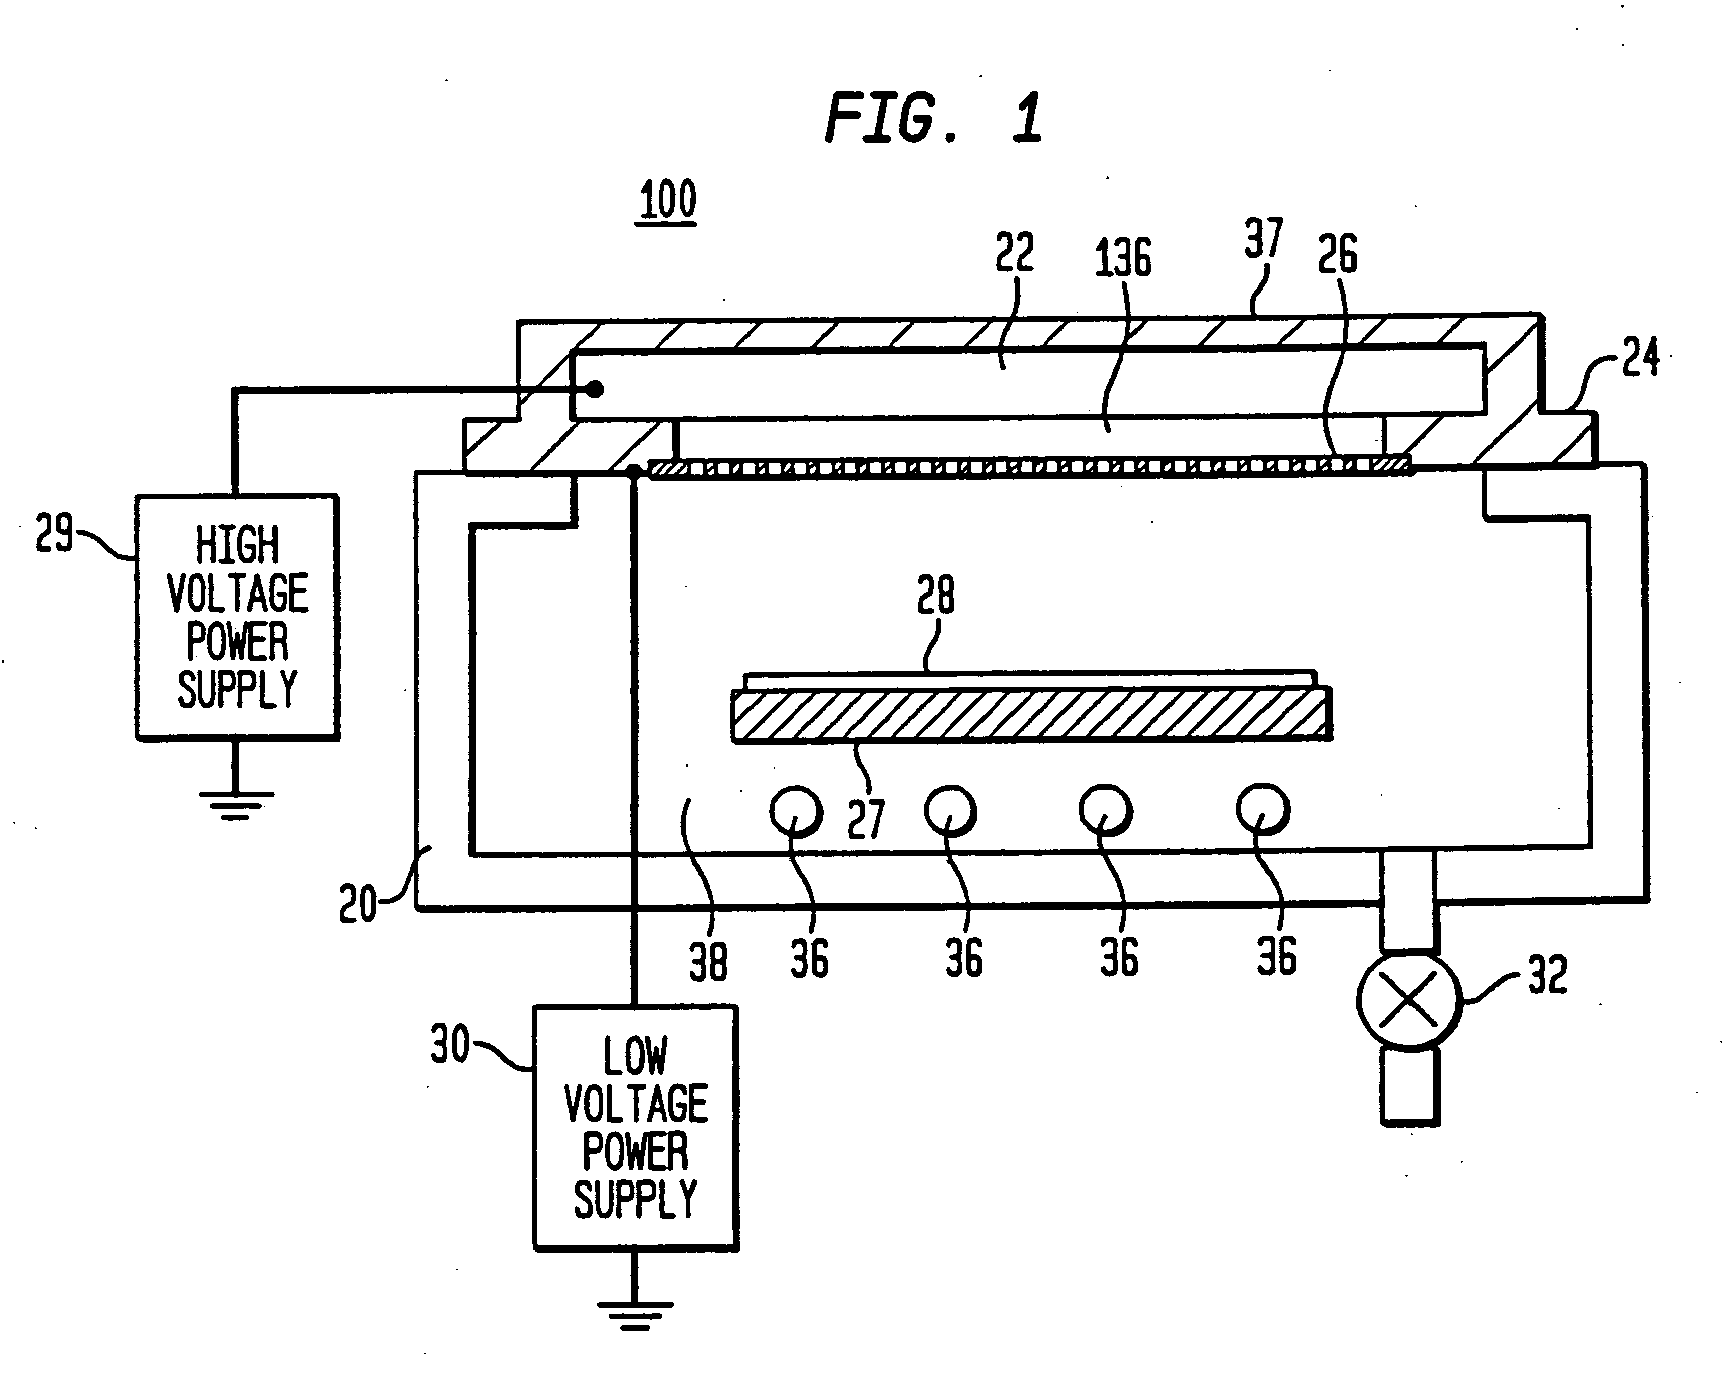 Methods and apparatus for e-beam treatment used to fabricate integrated circuit devices